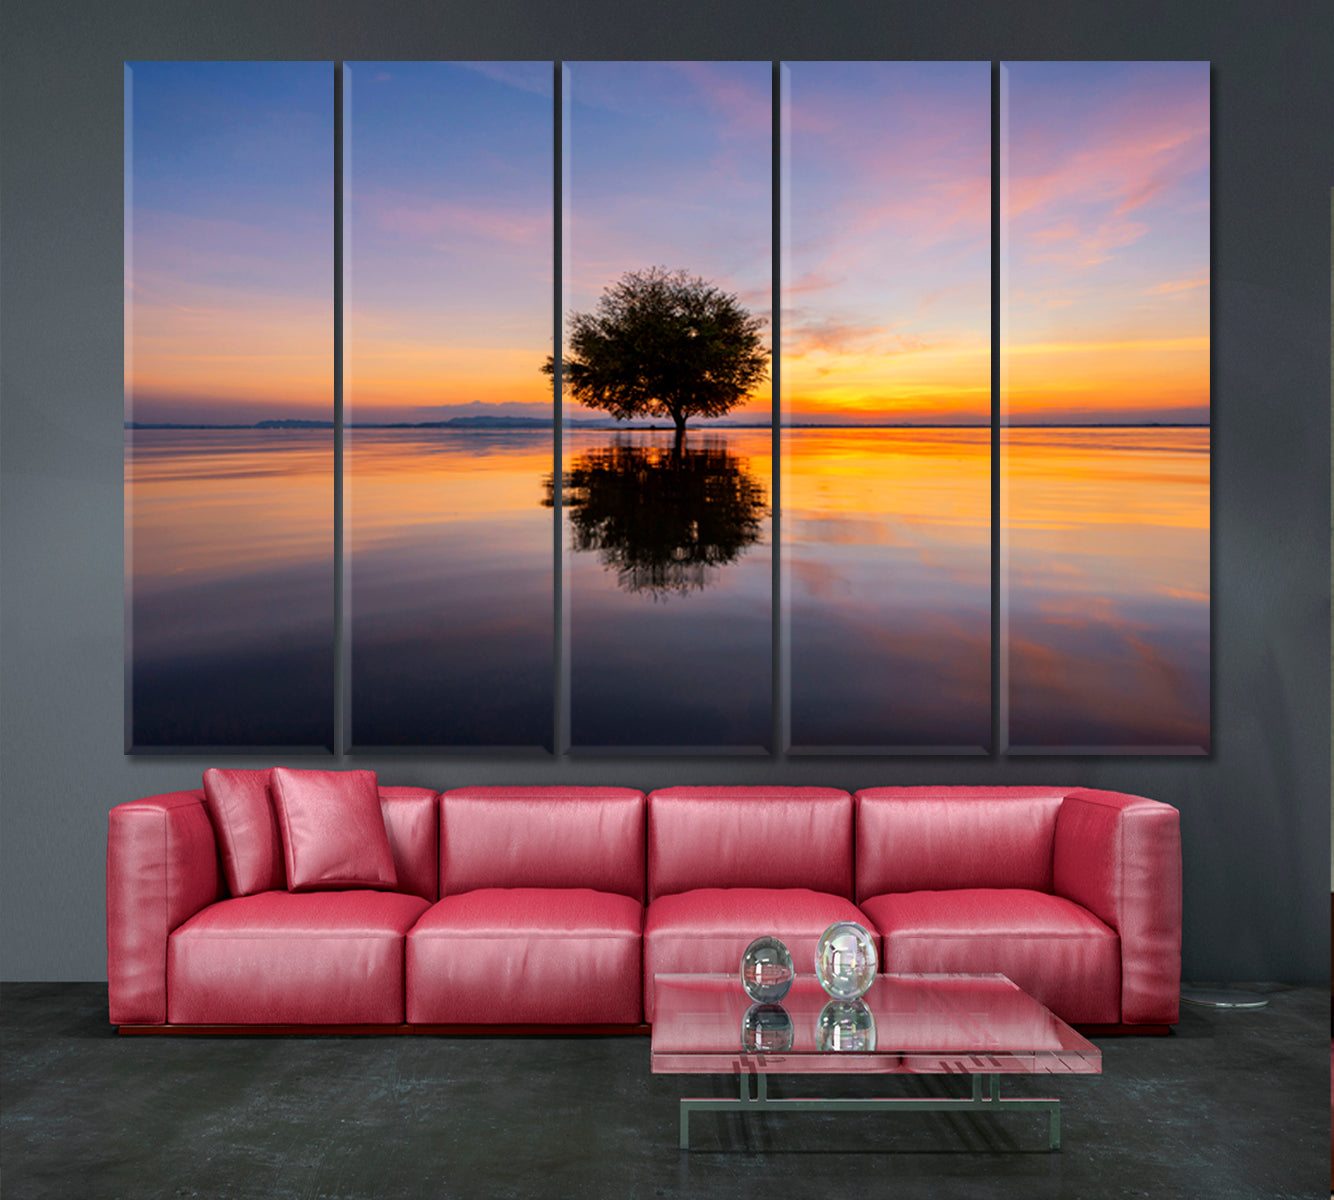 Breathtaking Landscape Inspired by Nature Sunset Over Water Flooded Trees Scenery Landscape Fine Art Print Artesty 5 panels 36" x 24" 